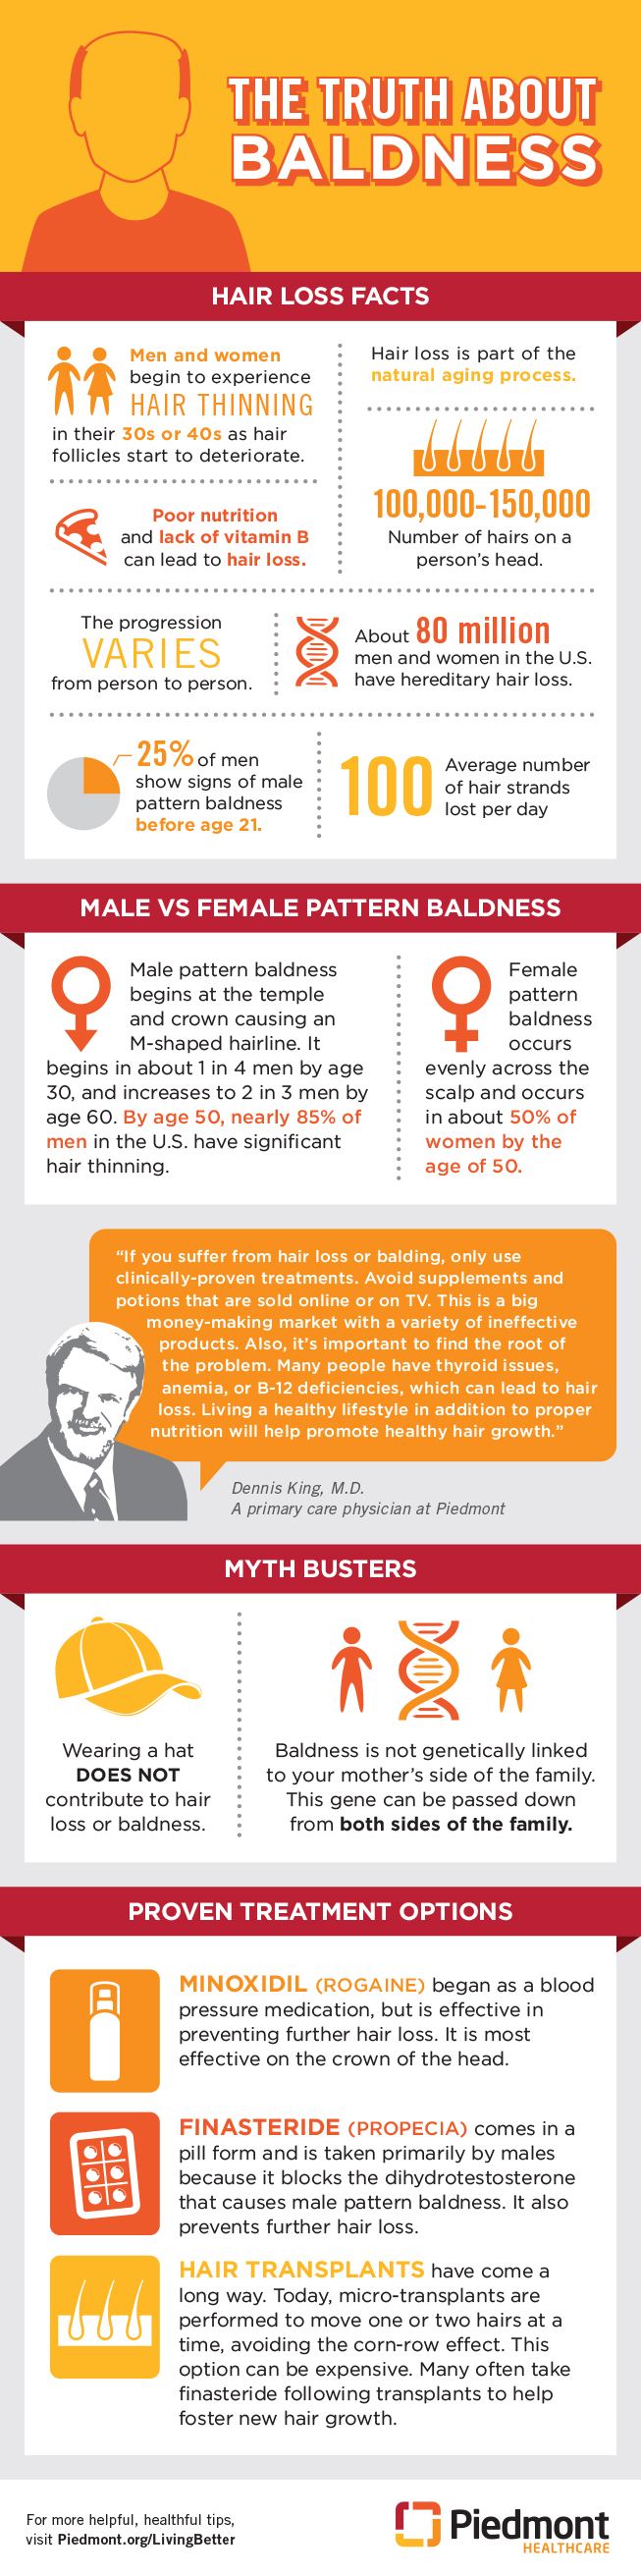 Facts, Myths and Information About Baldness | Piedmont Healthcare